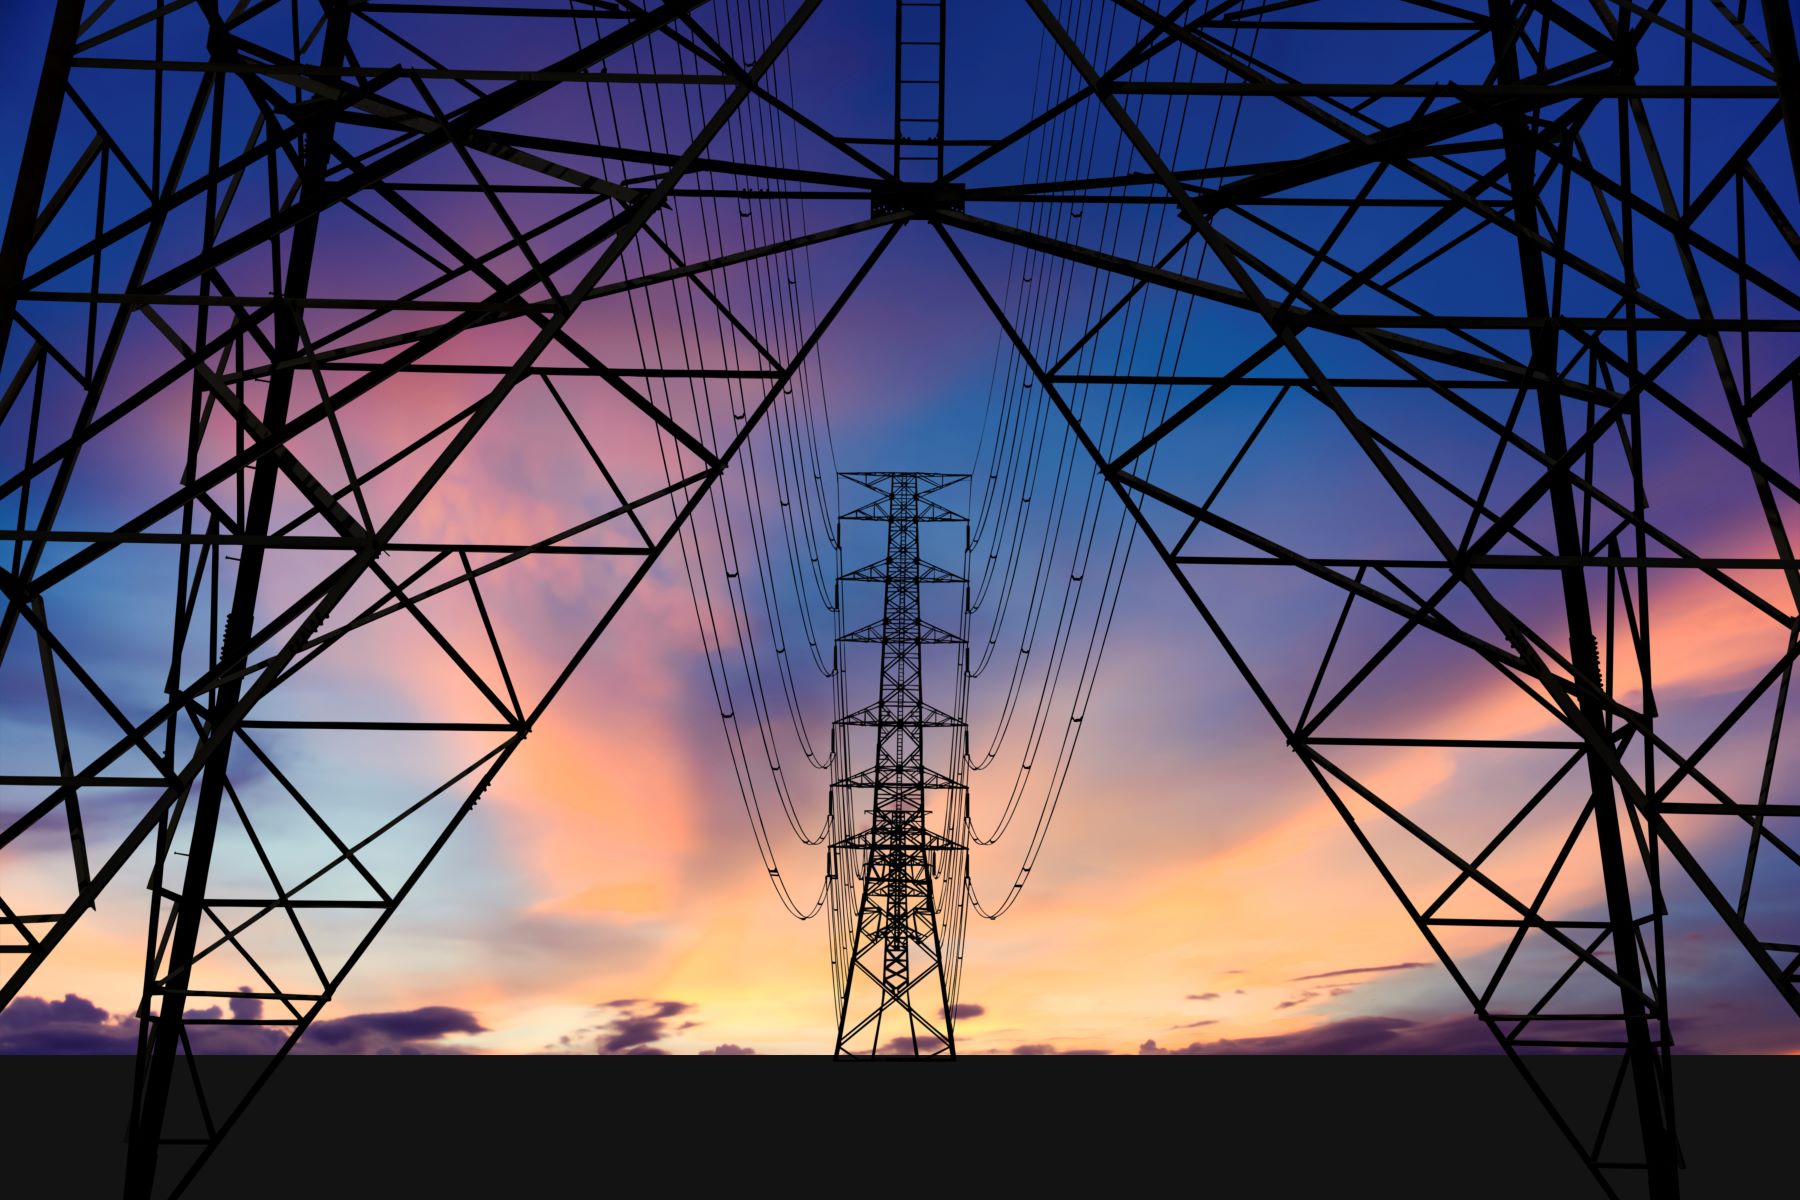 A symmetric view from inside an electricity pylon with a sunset sky in the background.